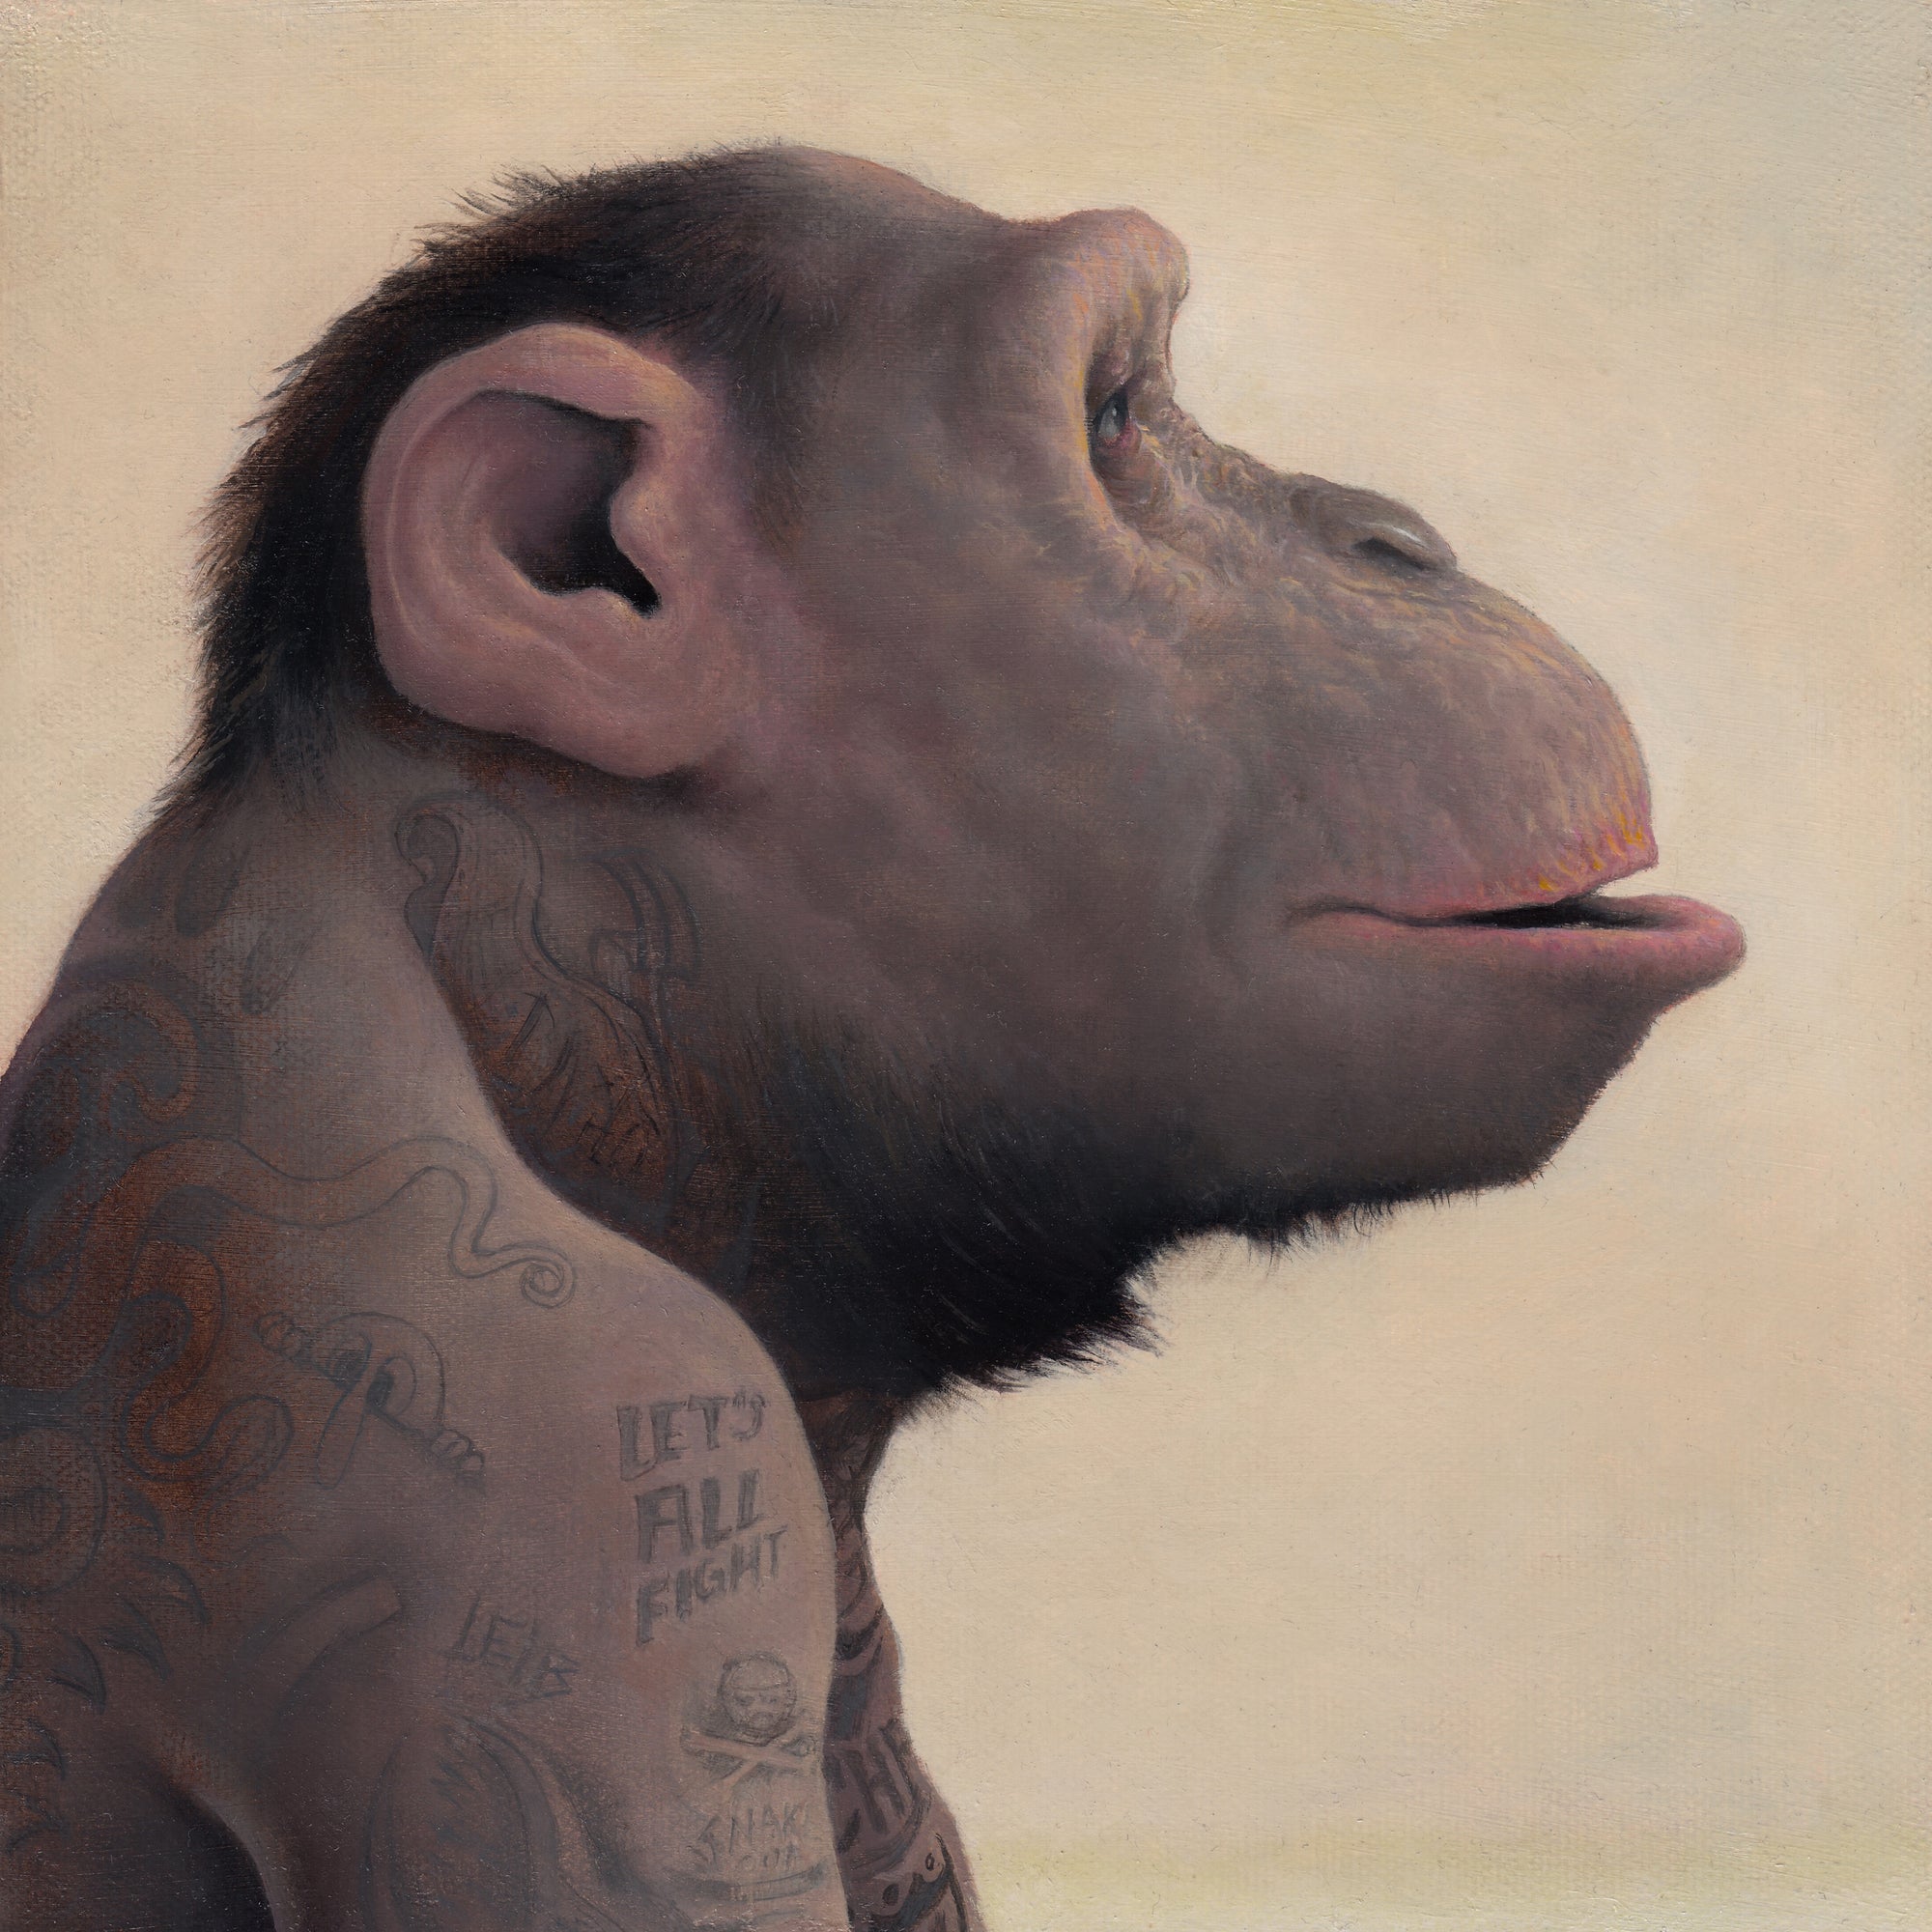 Chris Leib - "Let's All Fight" - 3/21/22